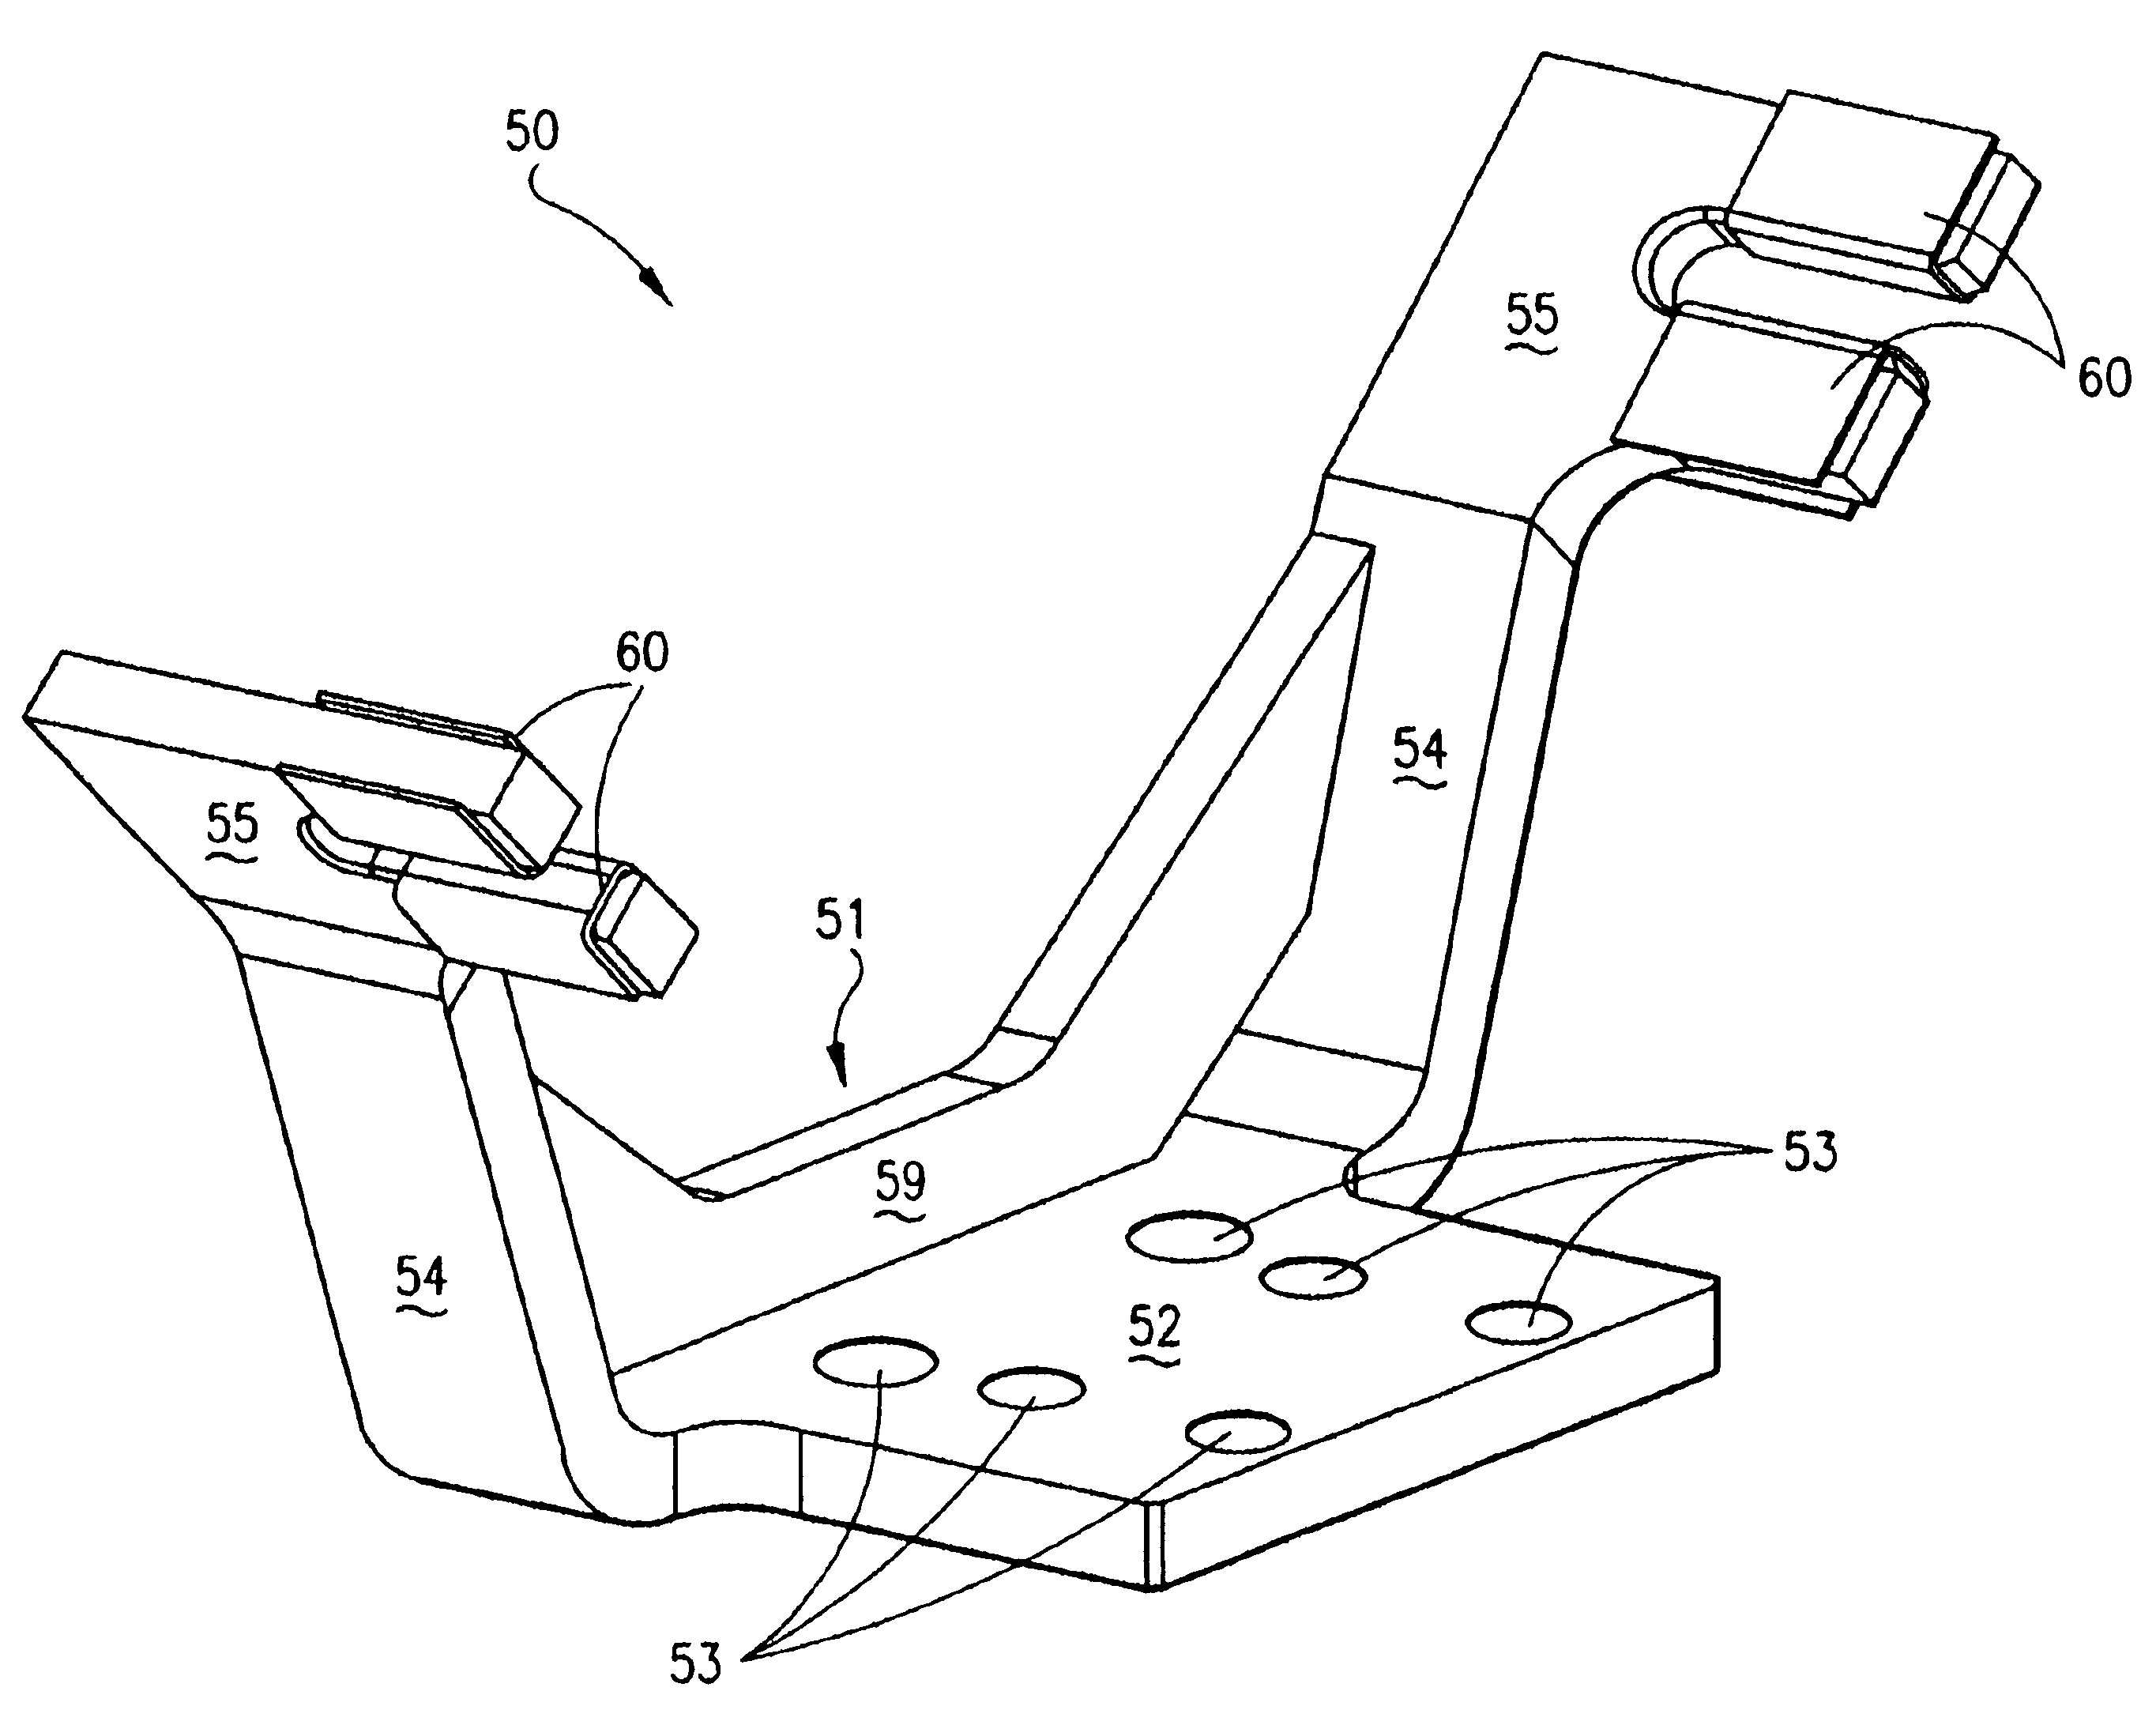 Transition duct support bracket wear cover